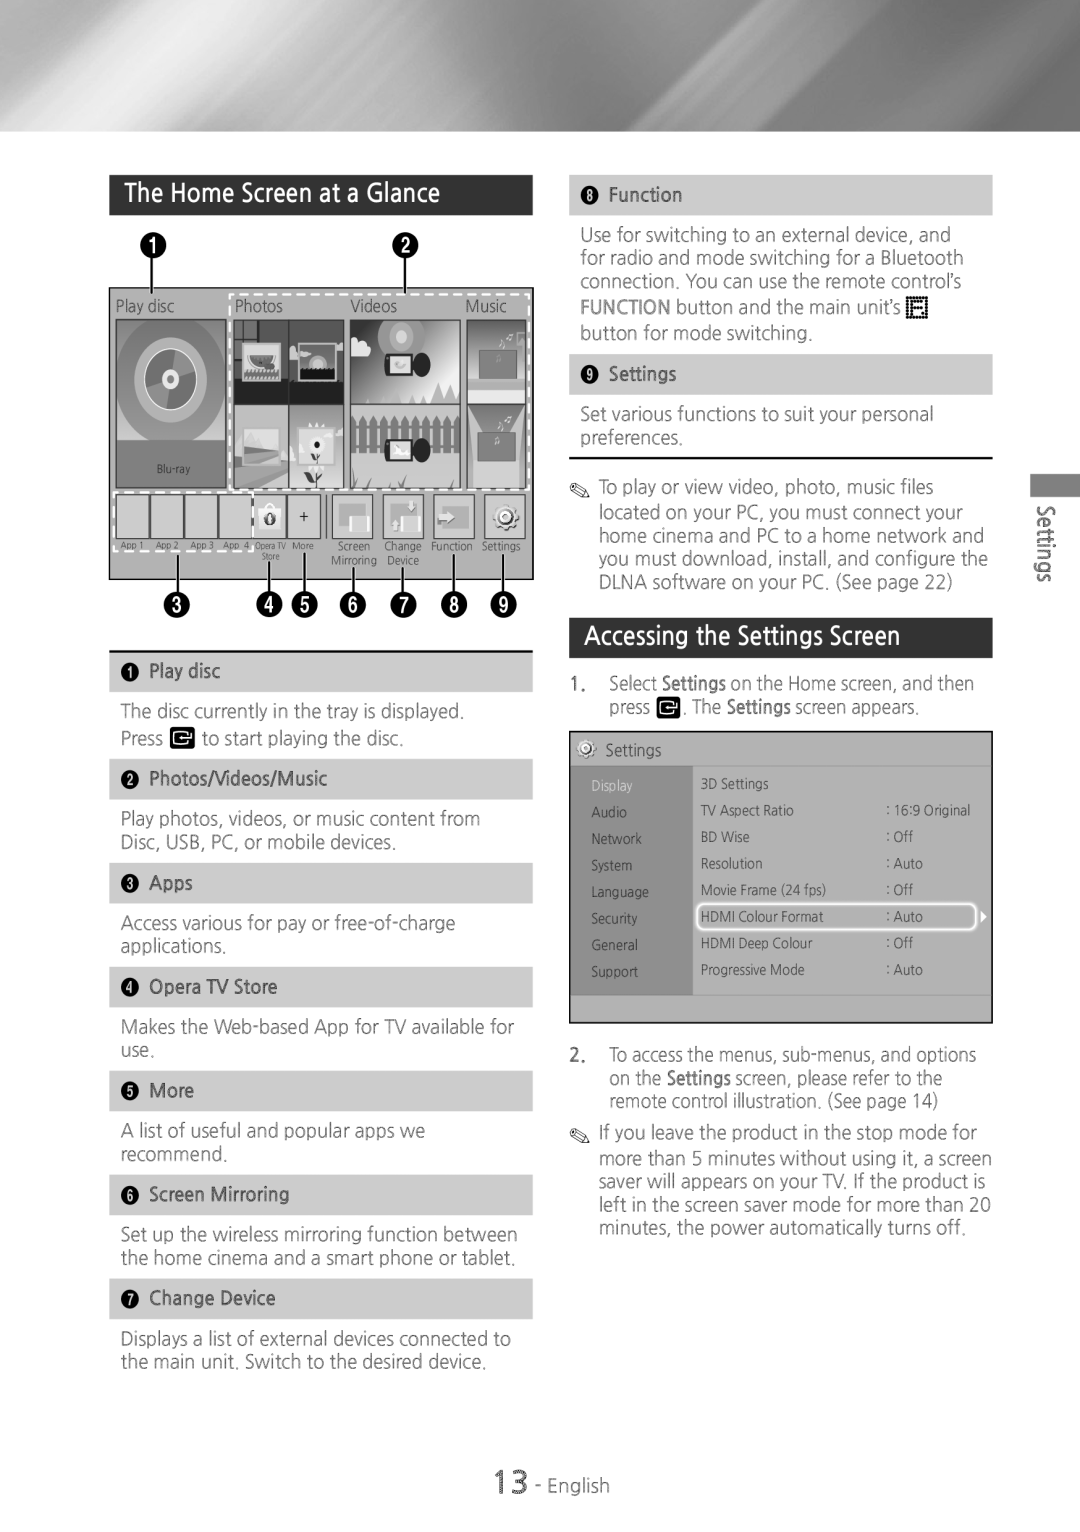 Samsung HT-HS5200, HT-H5200 user manual 3 45 6 7 8, The Home Screen at a Glance, Accessing the Settings Screen 